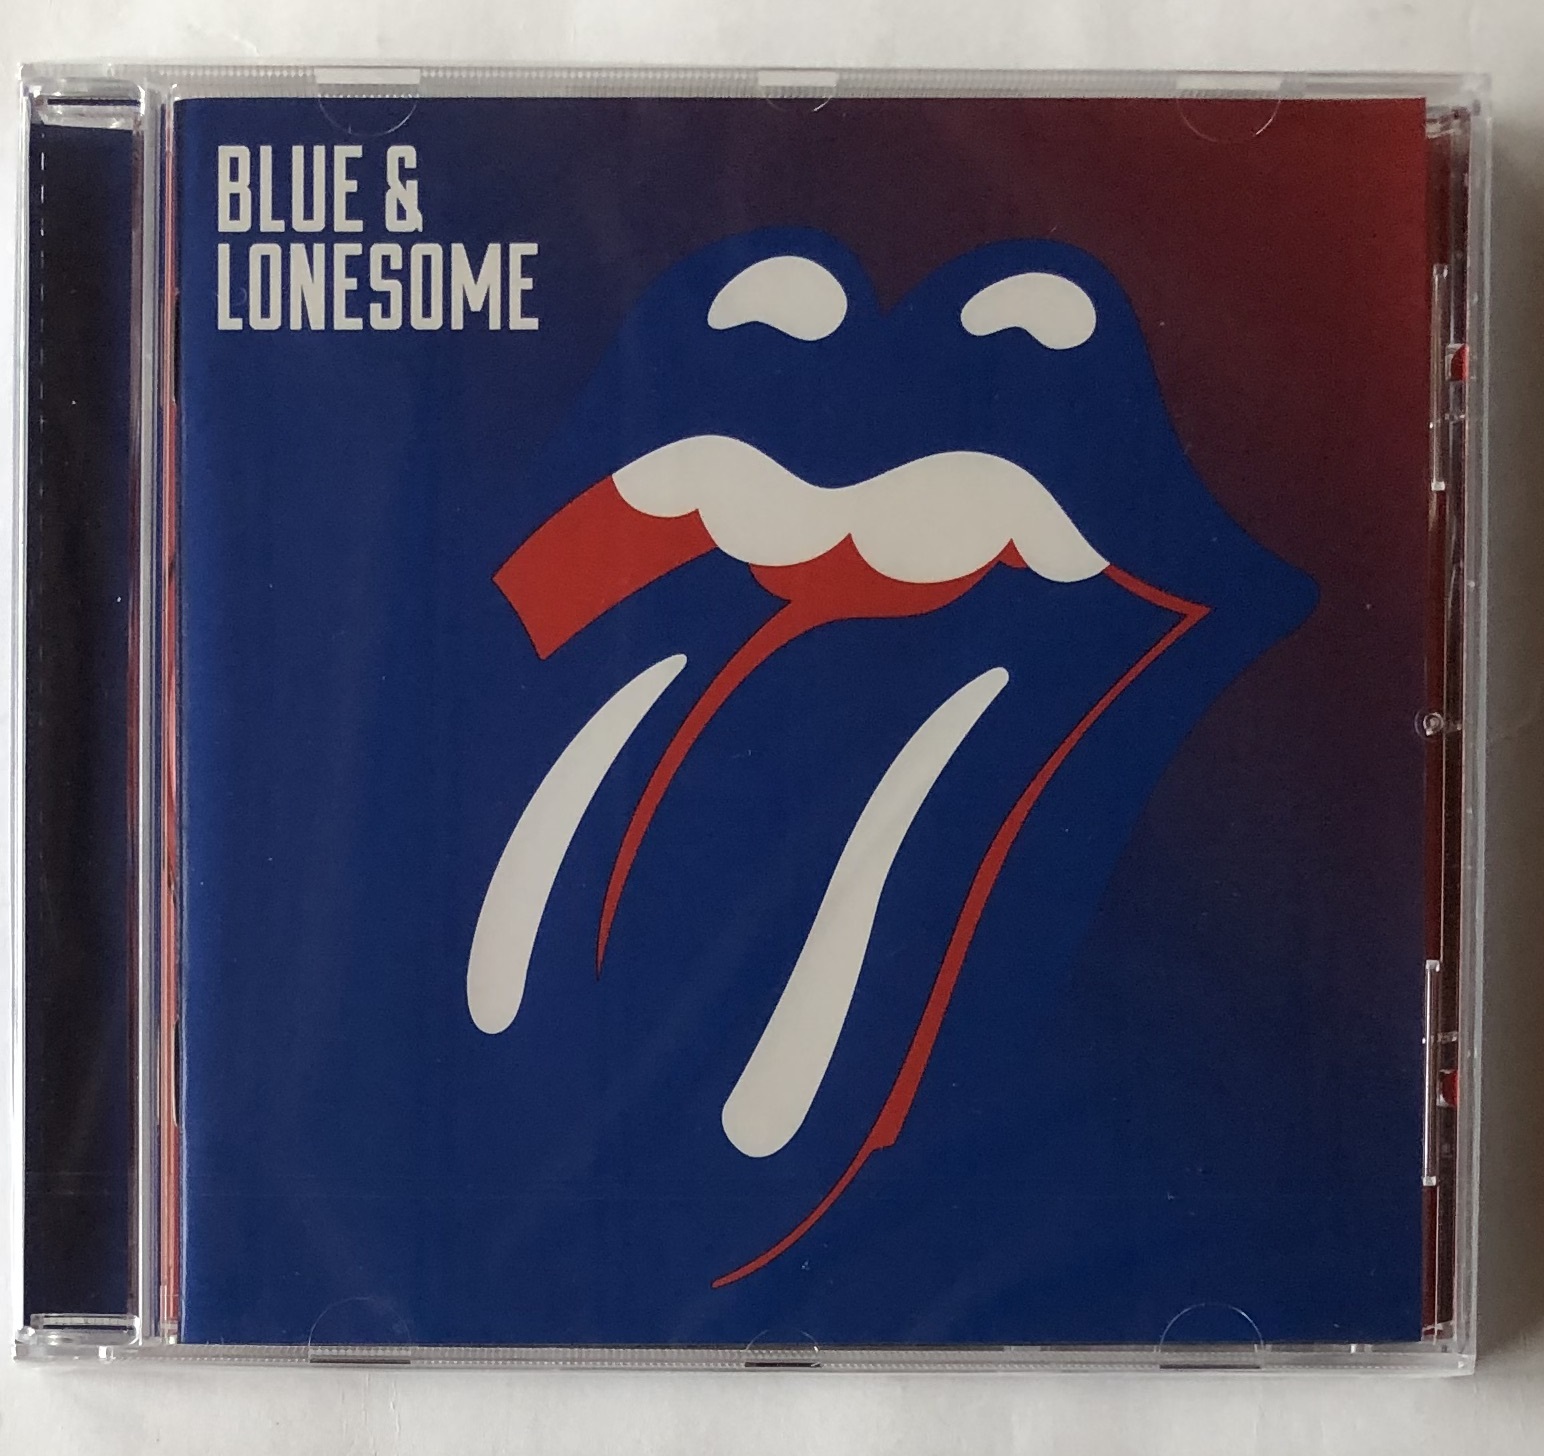 & lonesome by The Rolling Stones, CD with Ref:119504060